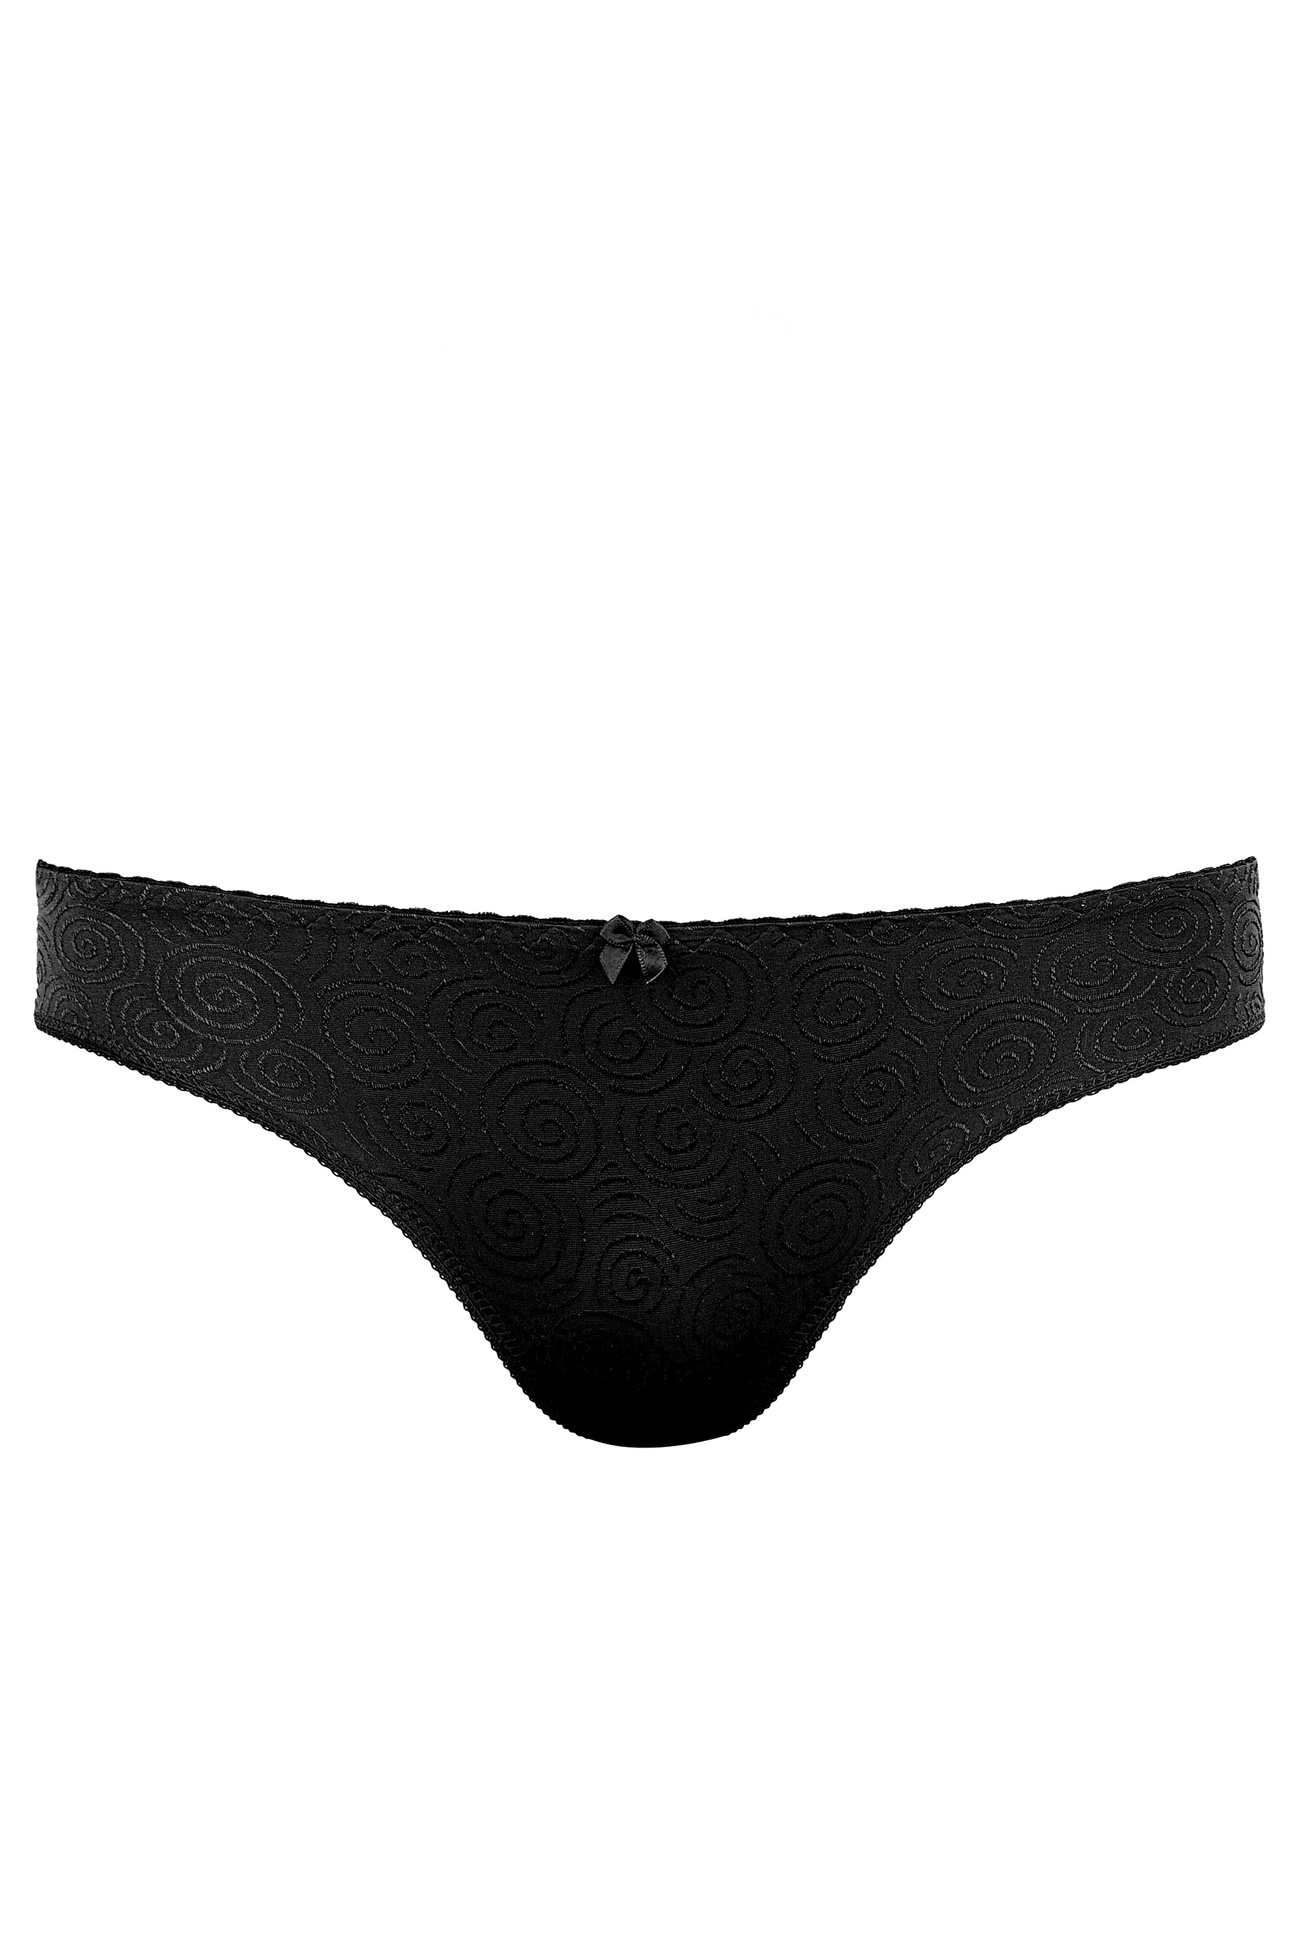 G-058 panty with decorative bow black